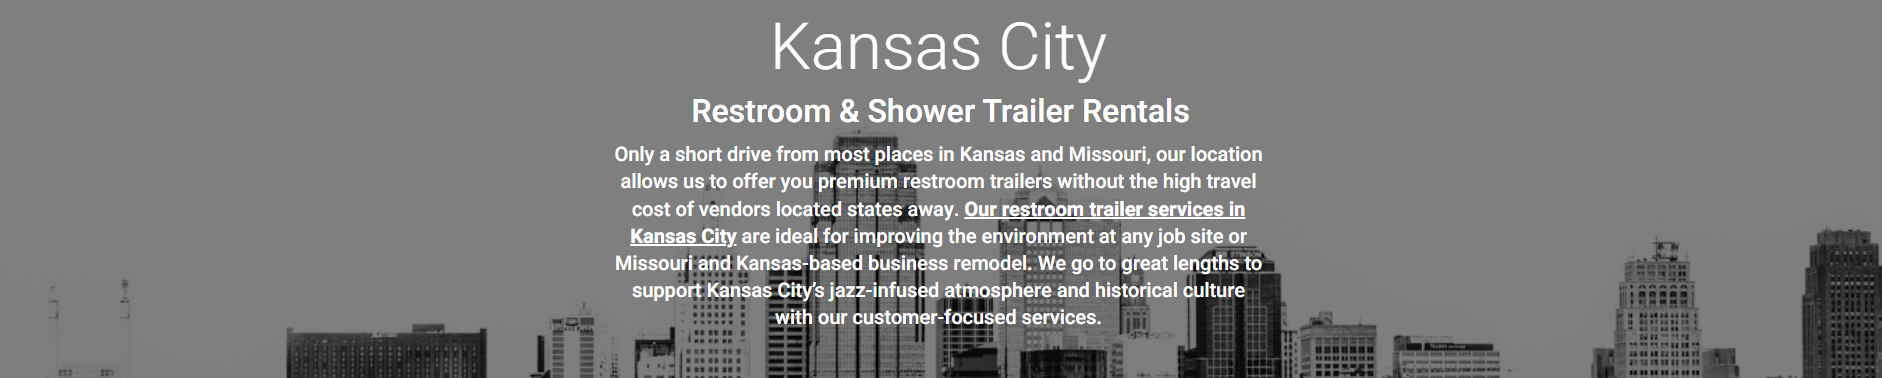 Shower and Restroom Trailer Rentals 1681167707 1681167707461 - Commercial Restroom Trailers in KC: What You Need to Know